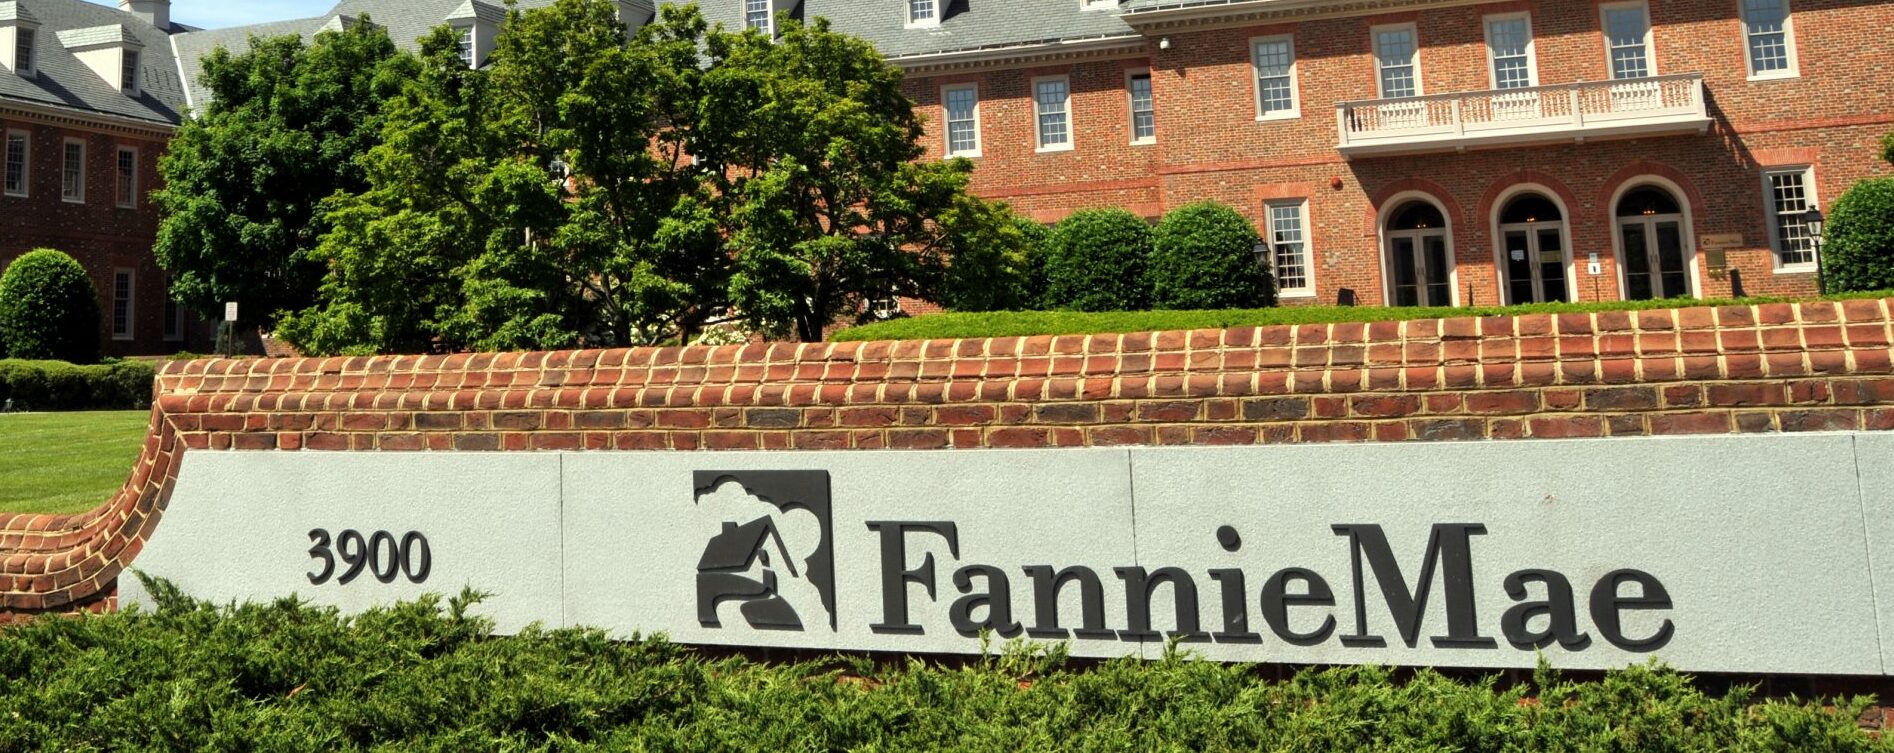 Fannie Lowers Home Sale and Origination Expectations For 2022/23